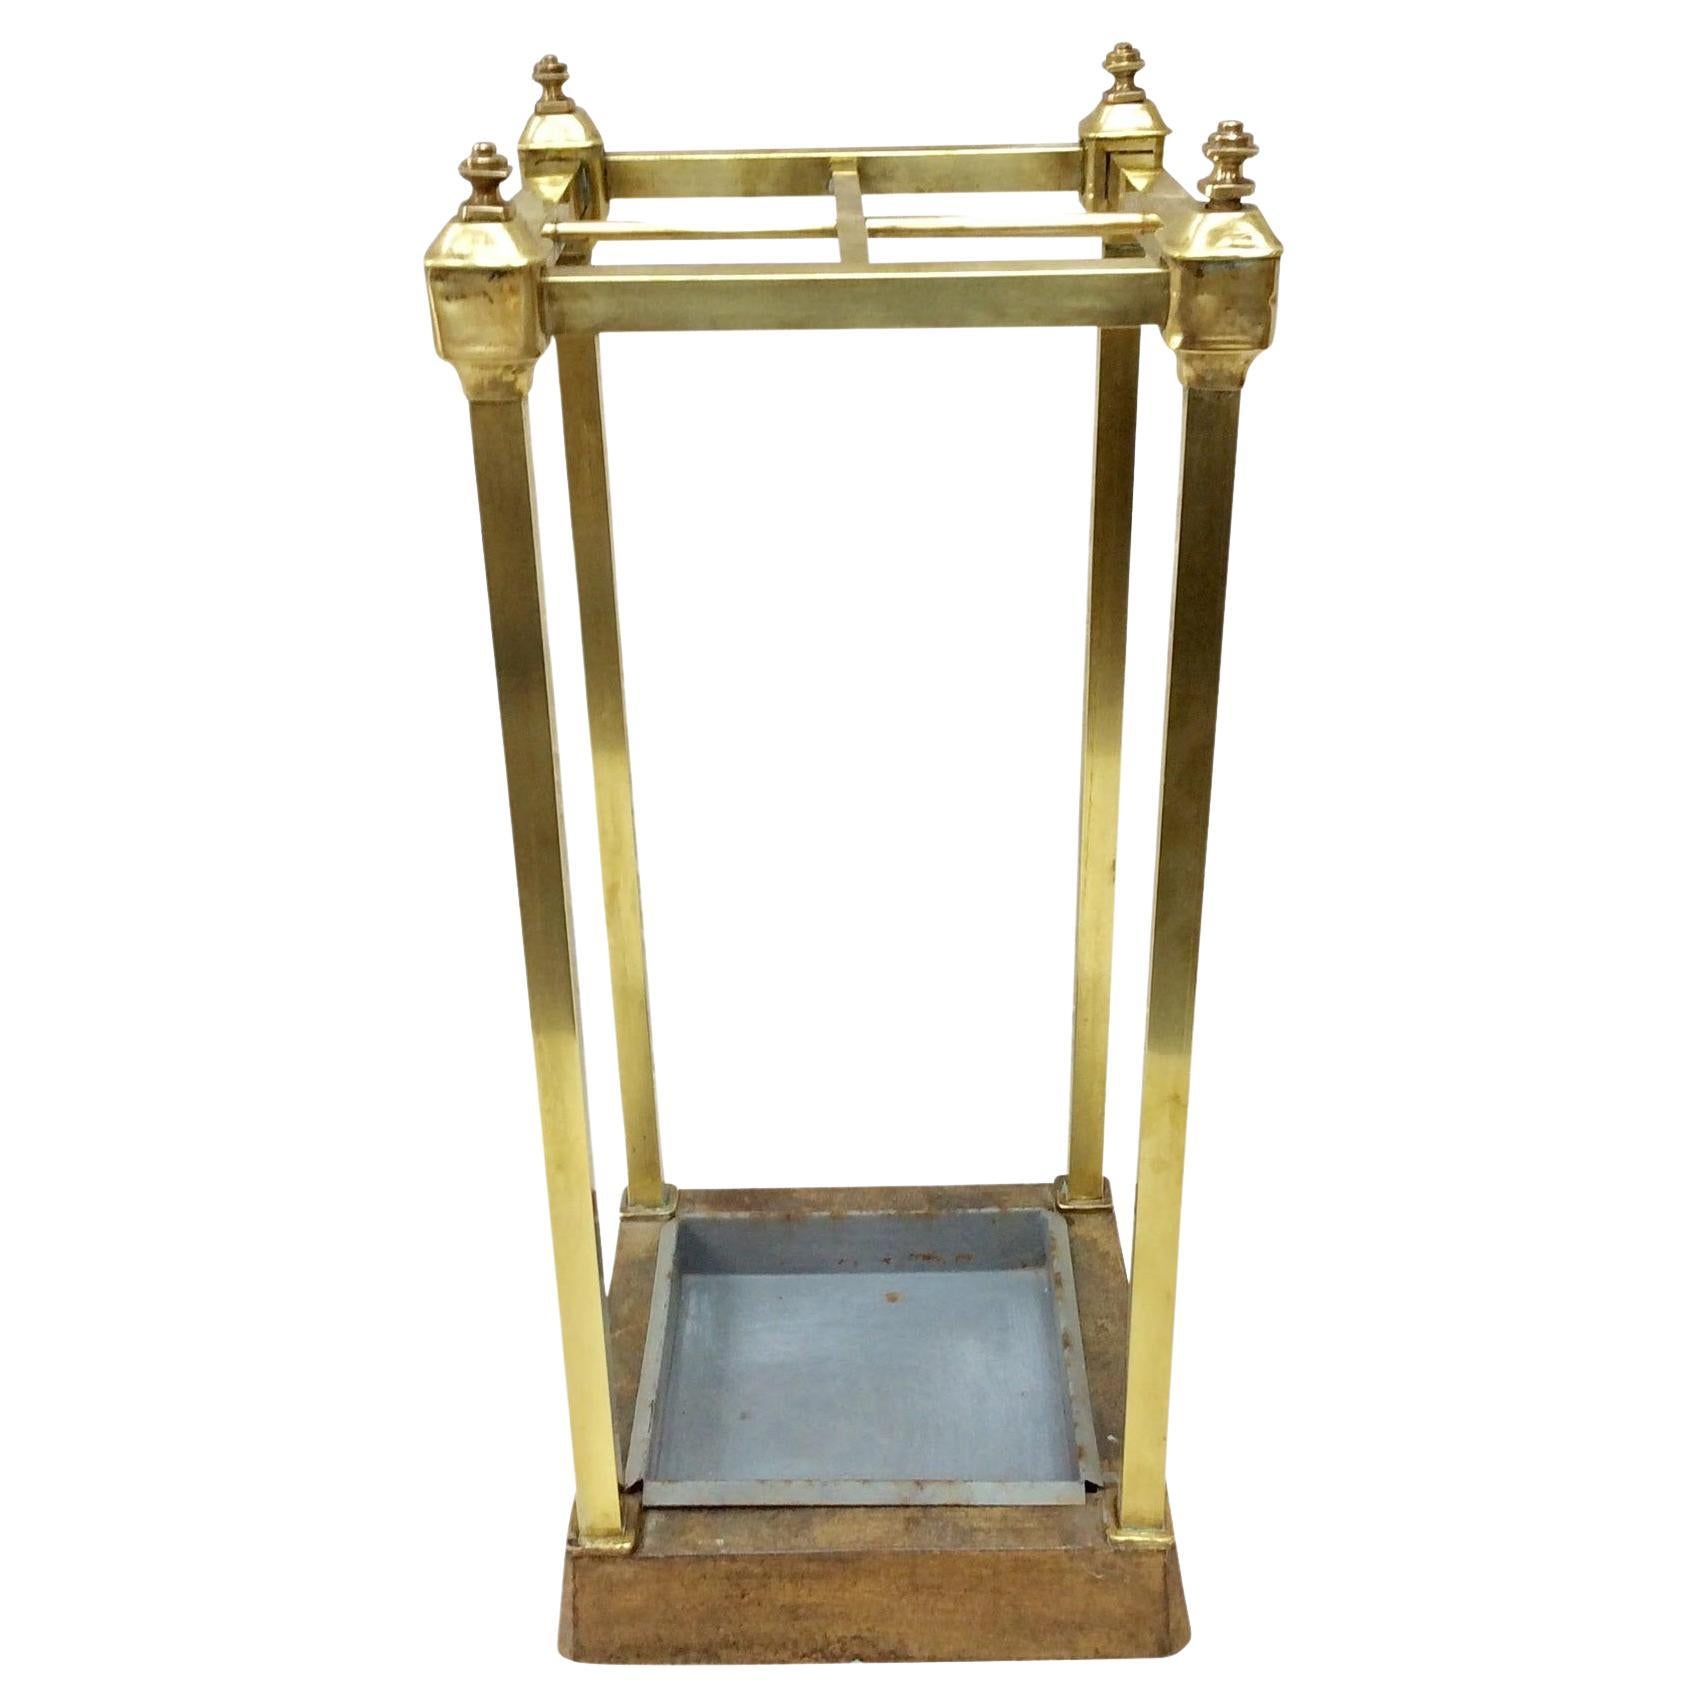 Early 20th Century French Brass Umbrella Stand